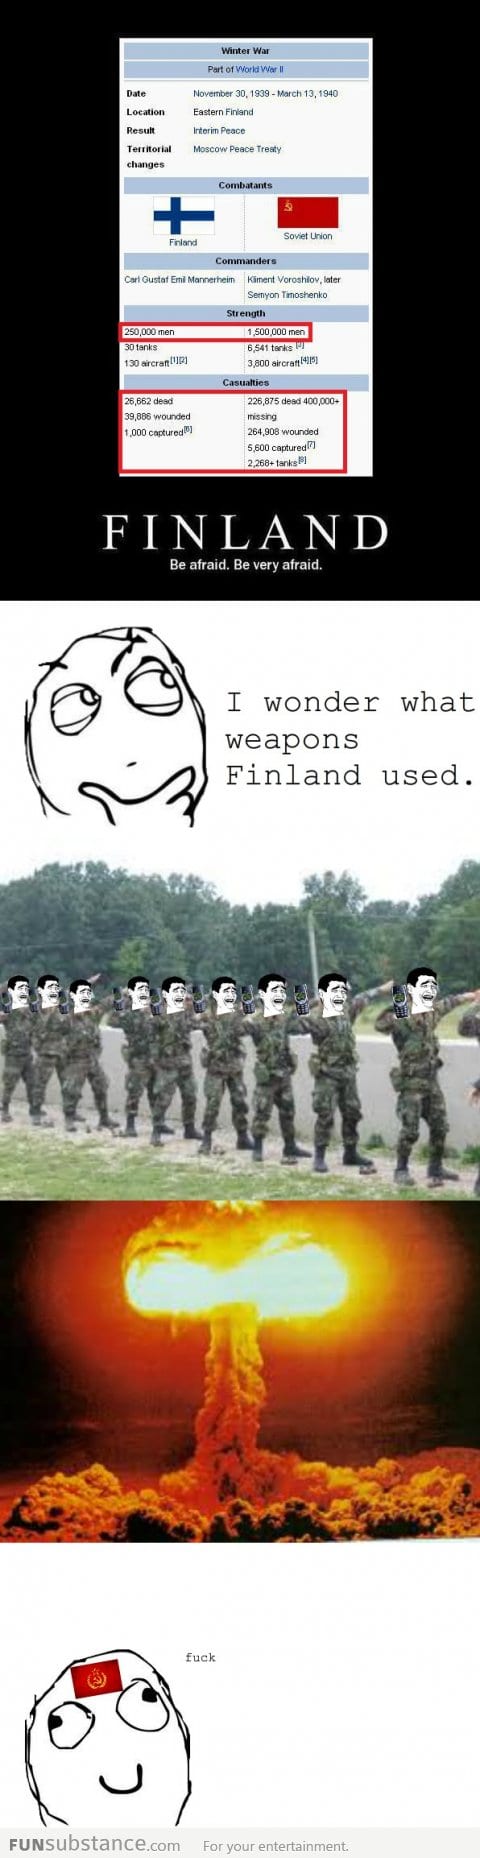 Finland is the boss!